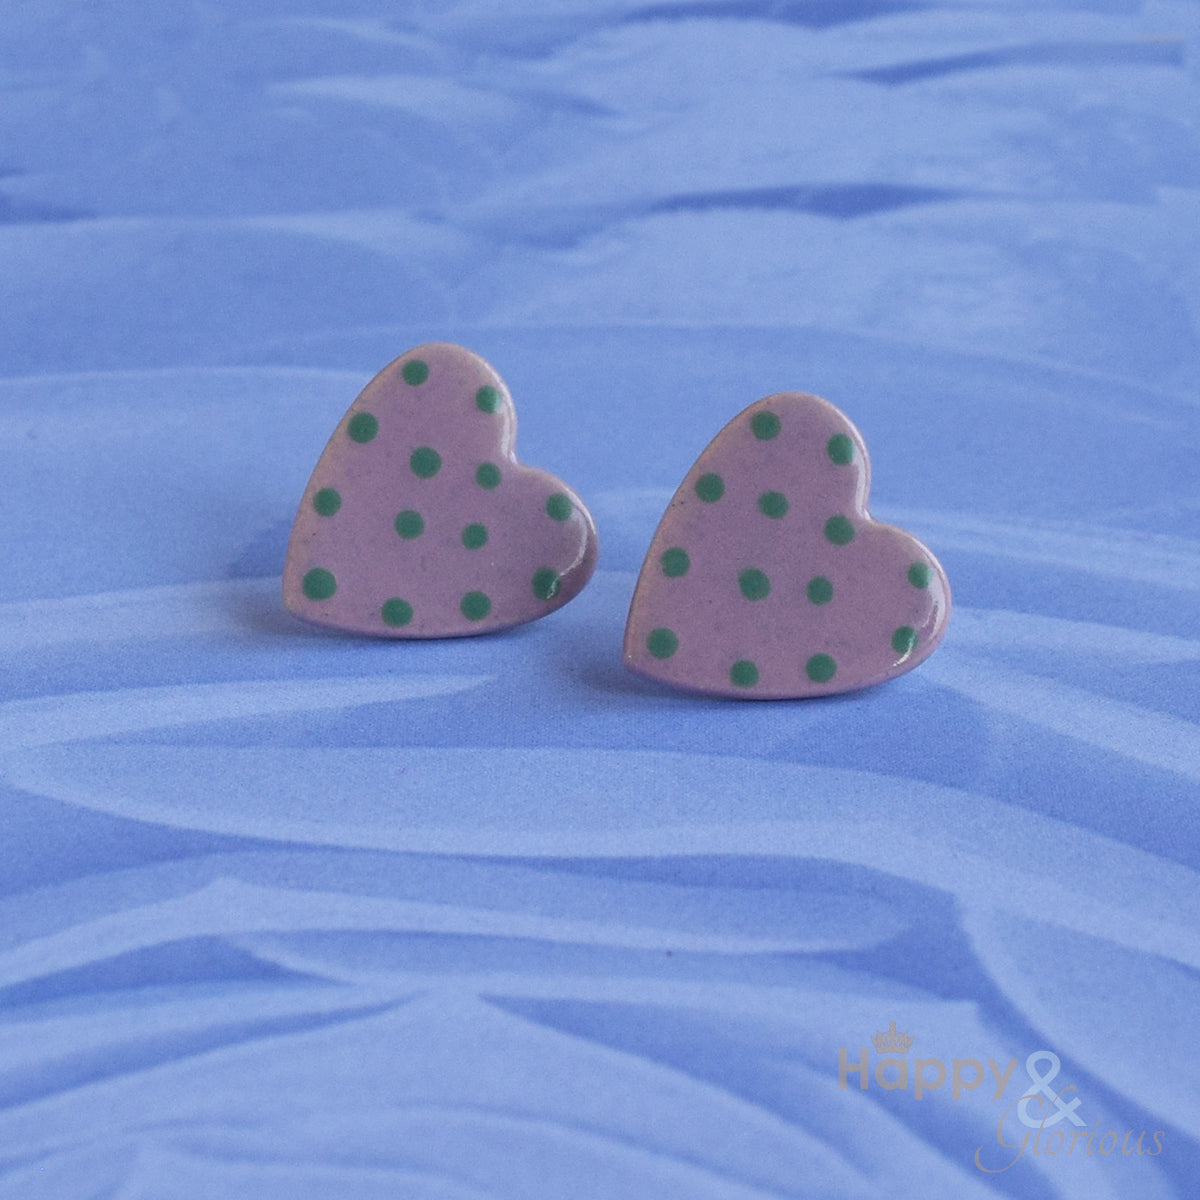 Lilac & green spotty ceramic heart stud earrings by Stockwell Ceramics